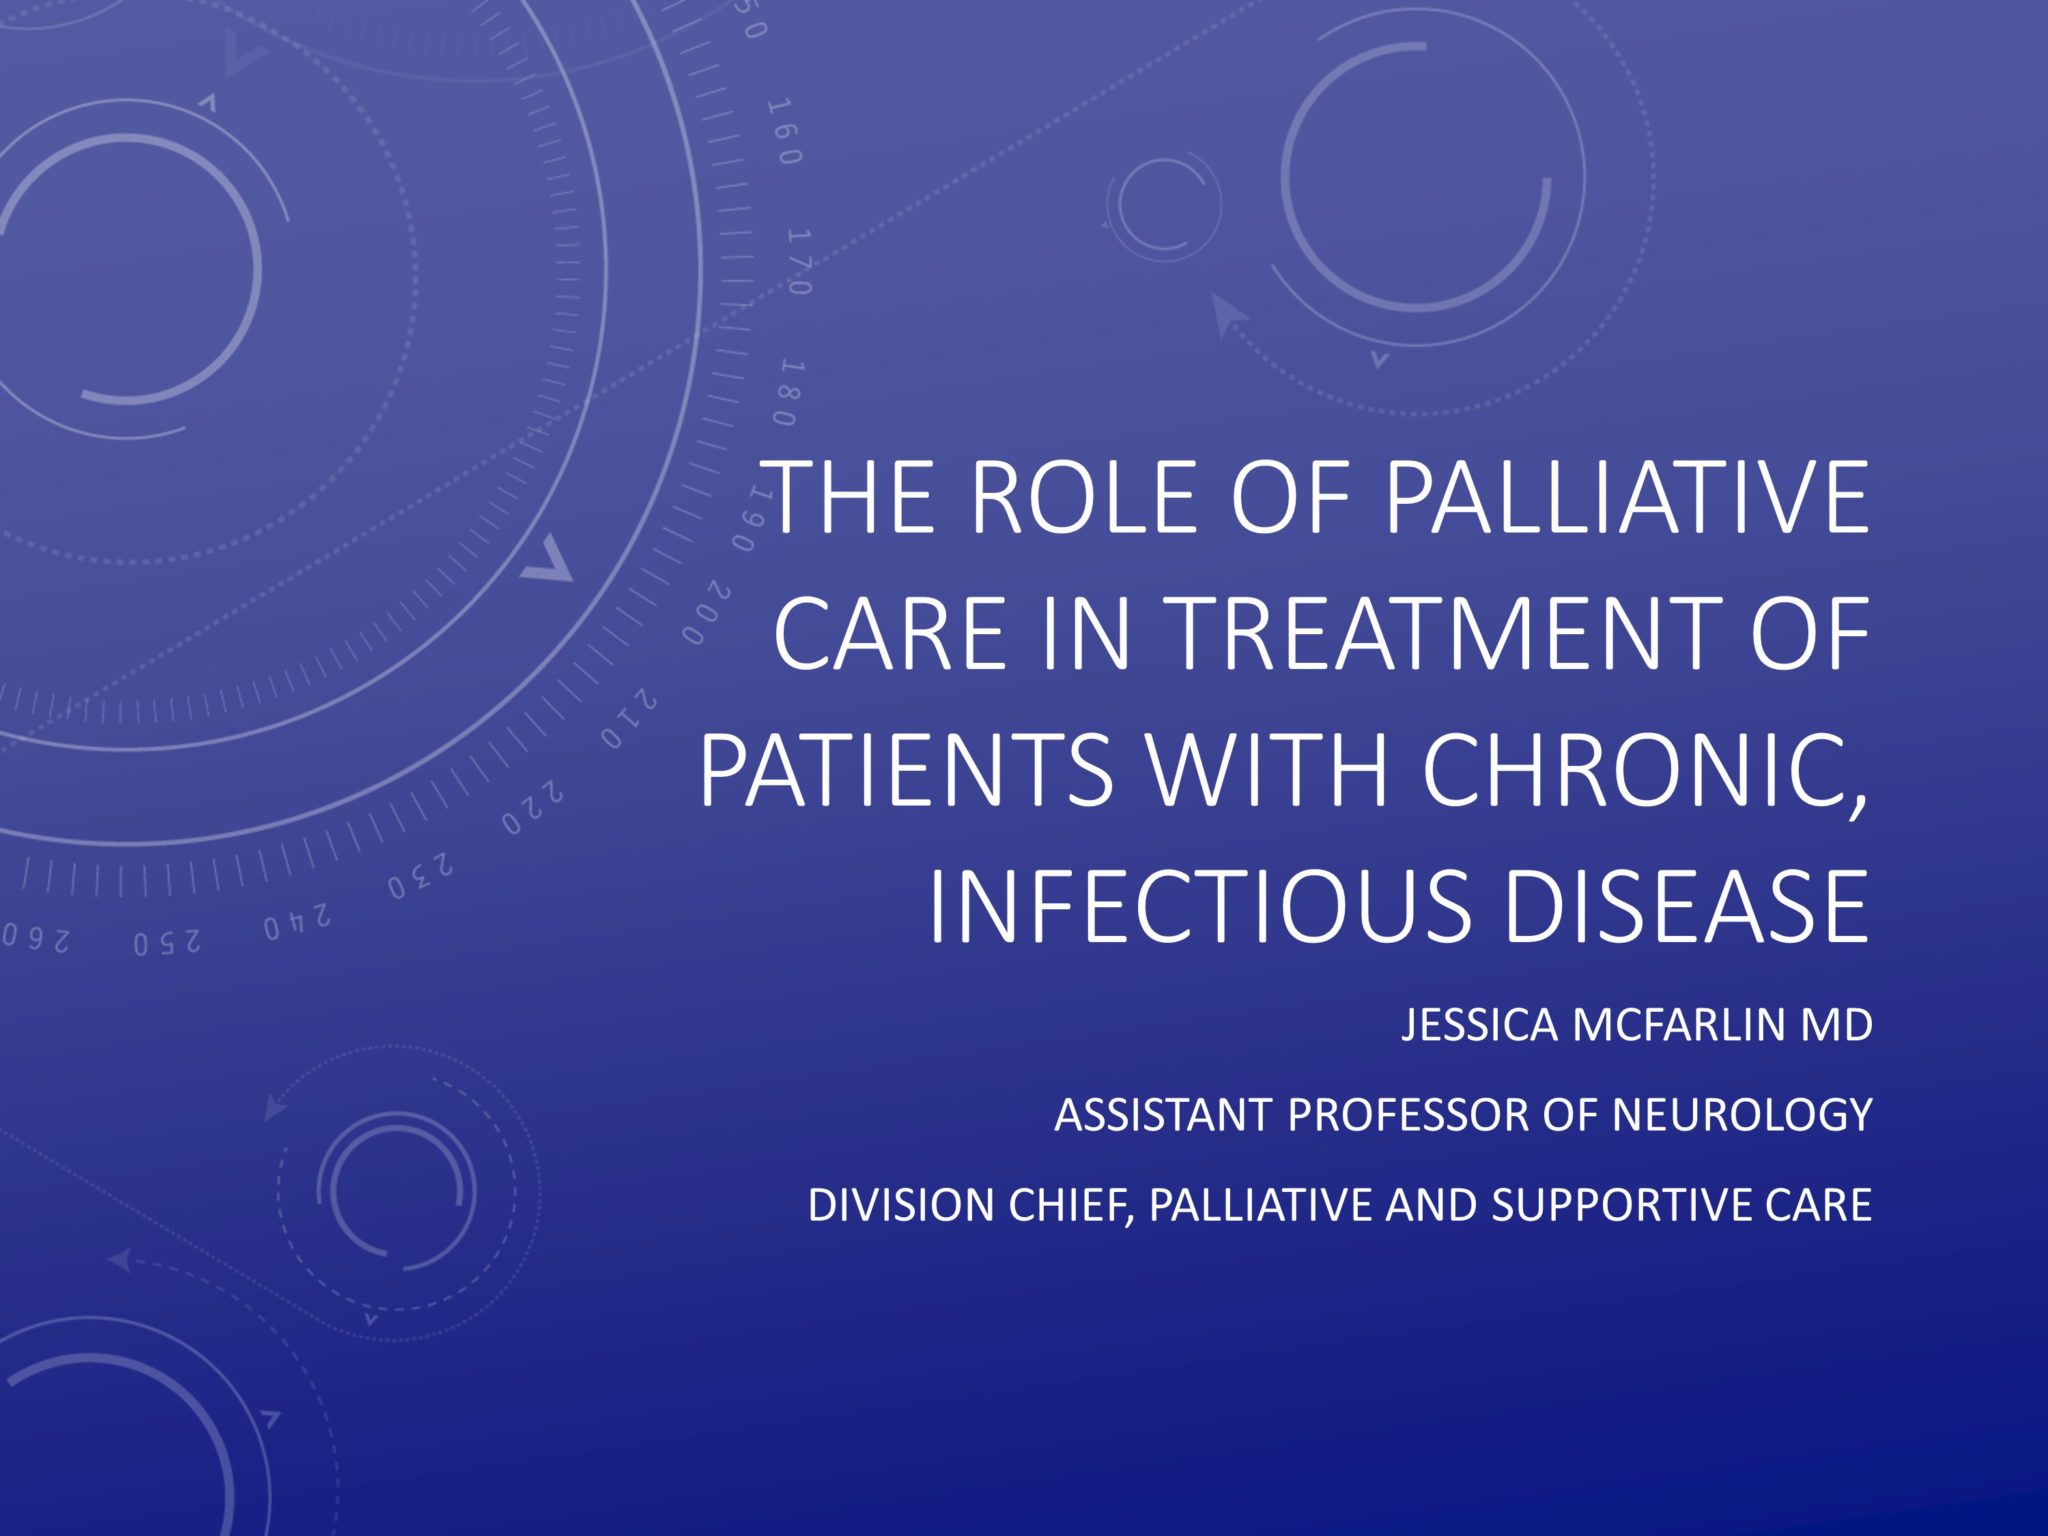 The role of palliative care in treatment of patients with chronic, infectious disease